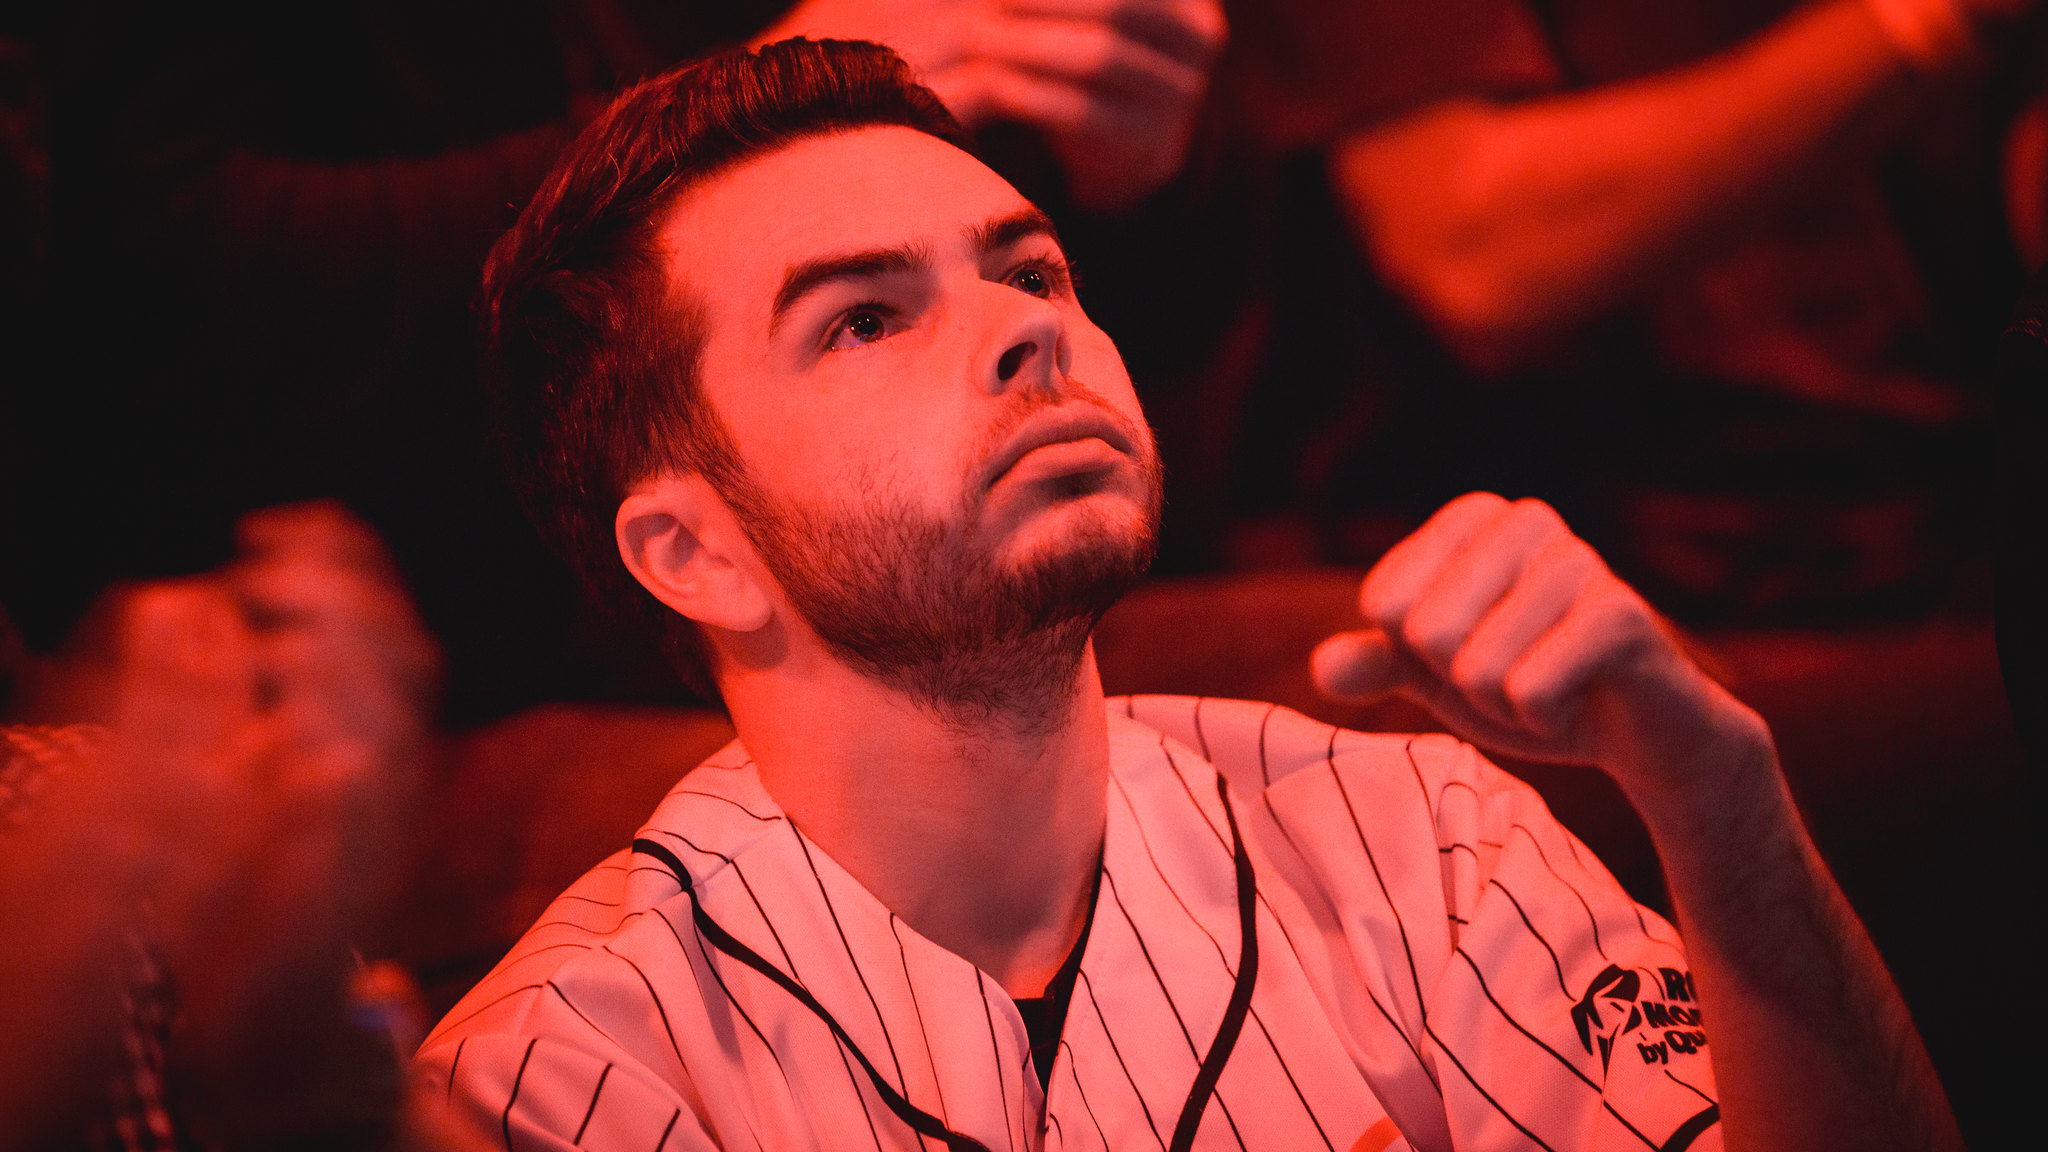 NadeShot promises S*x is temporary, gaming is forever tattoo if